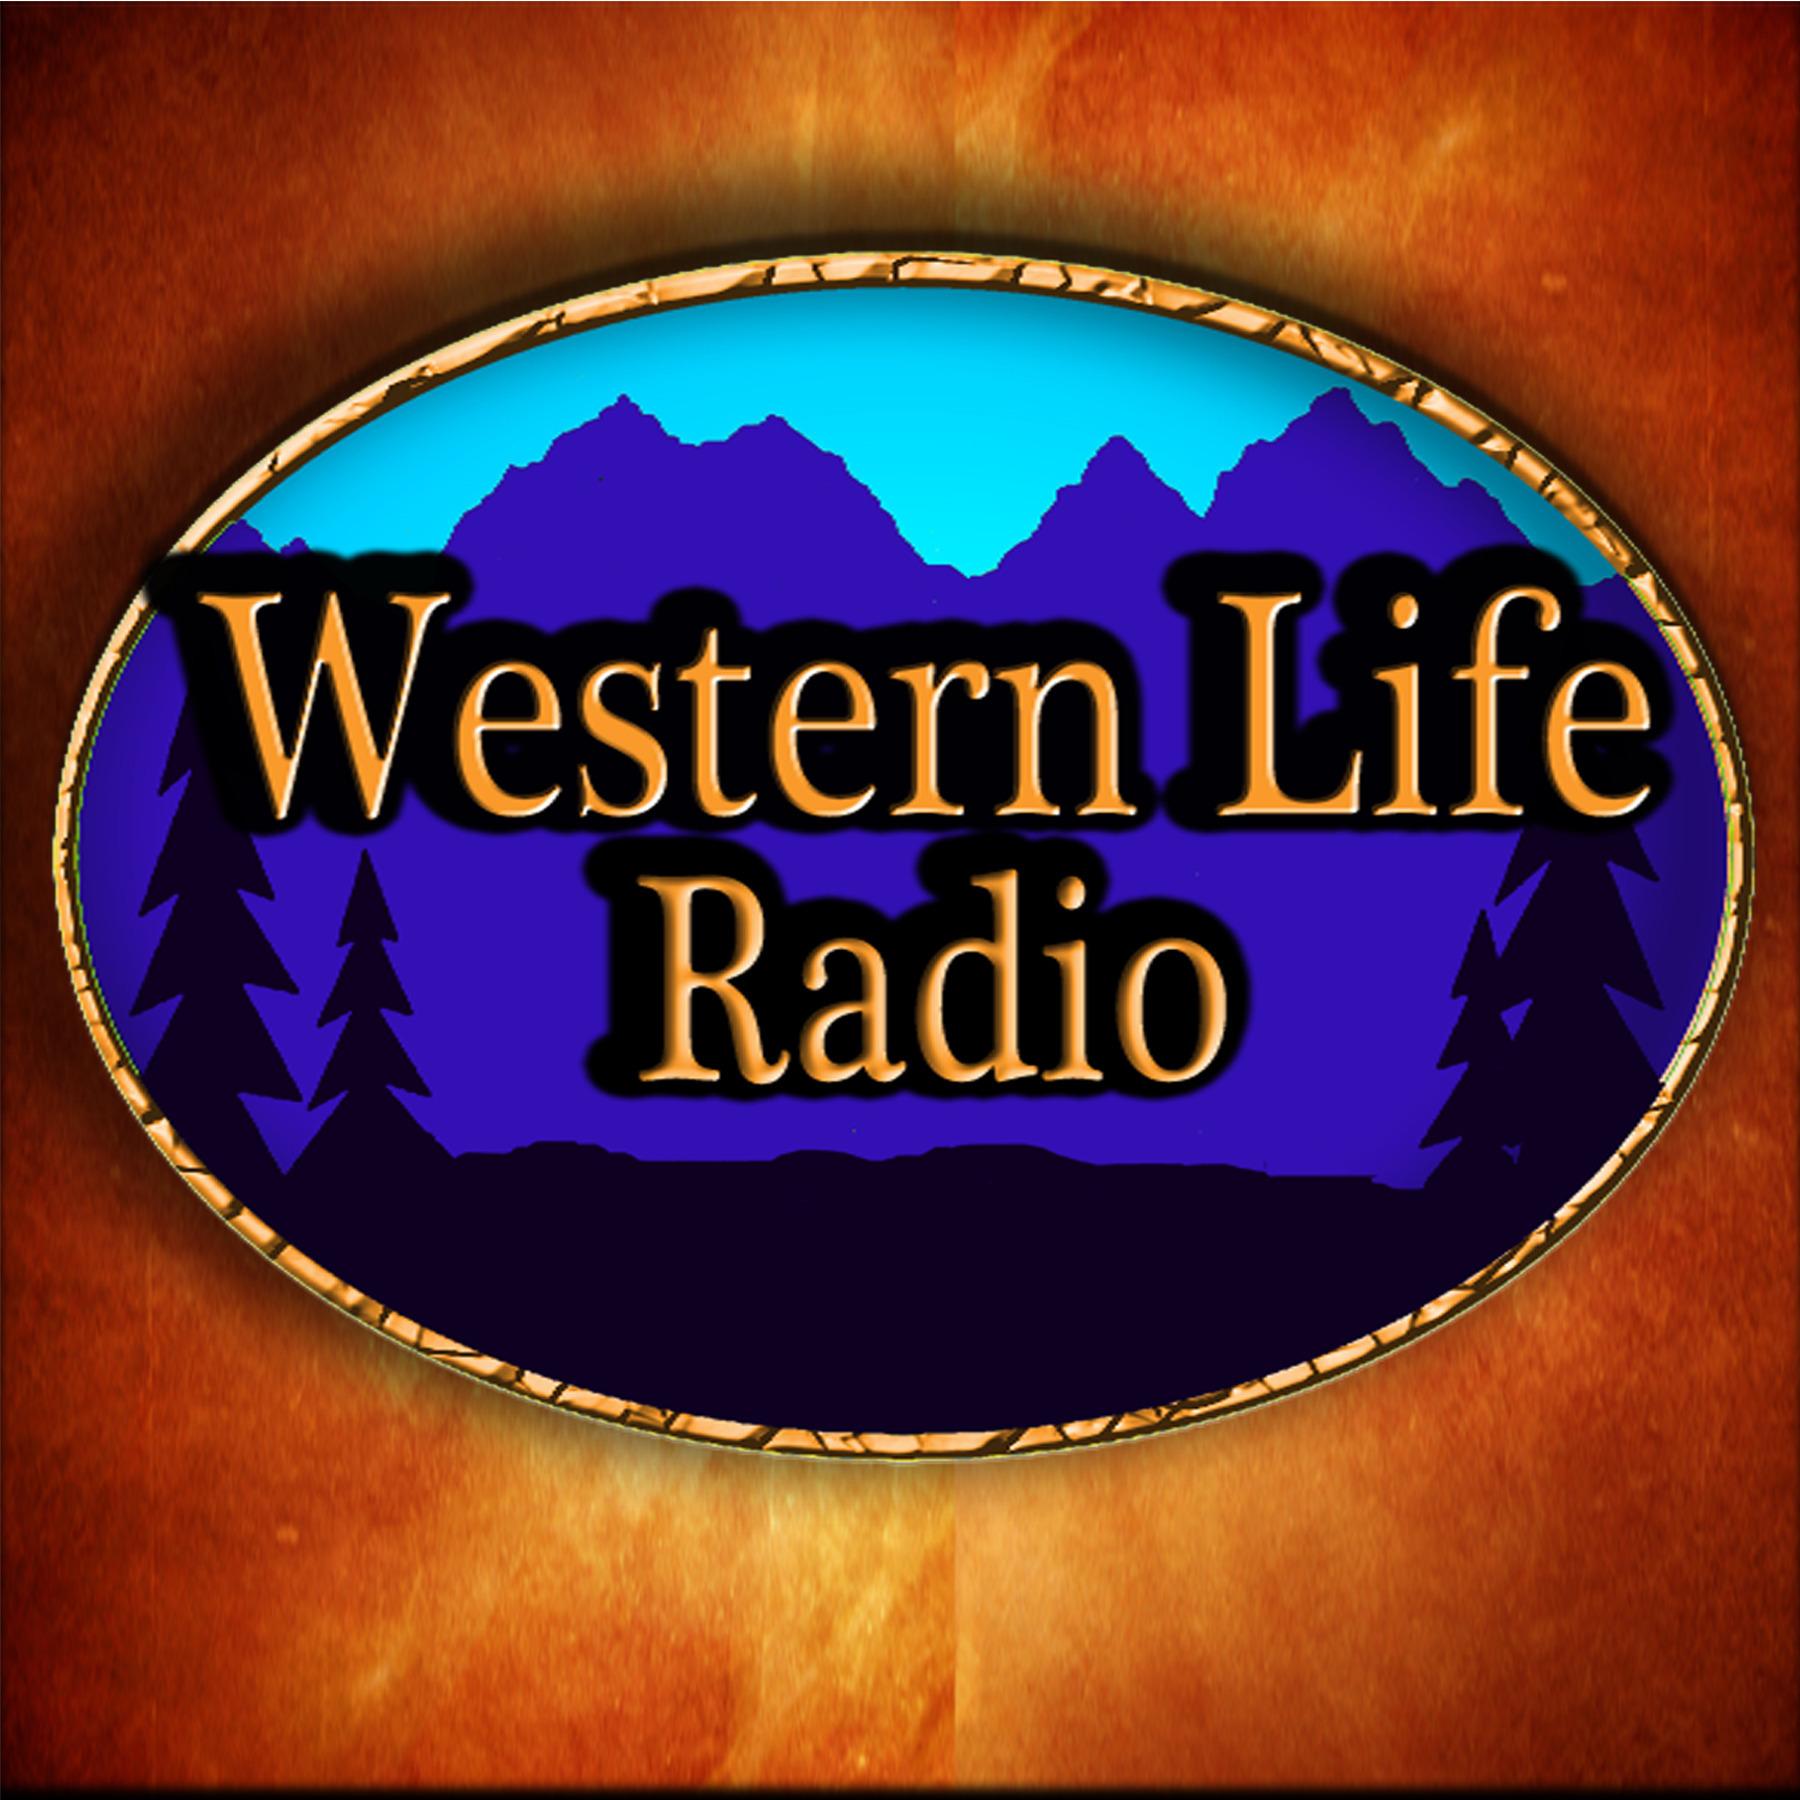 Western Life Radio presented by the Backcountry Radio Network